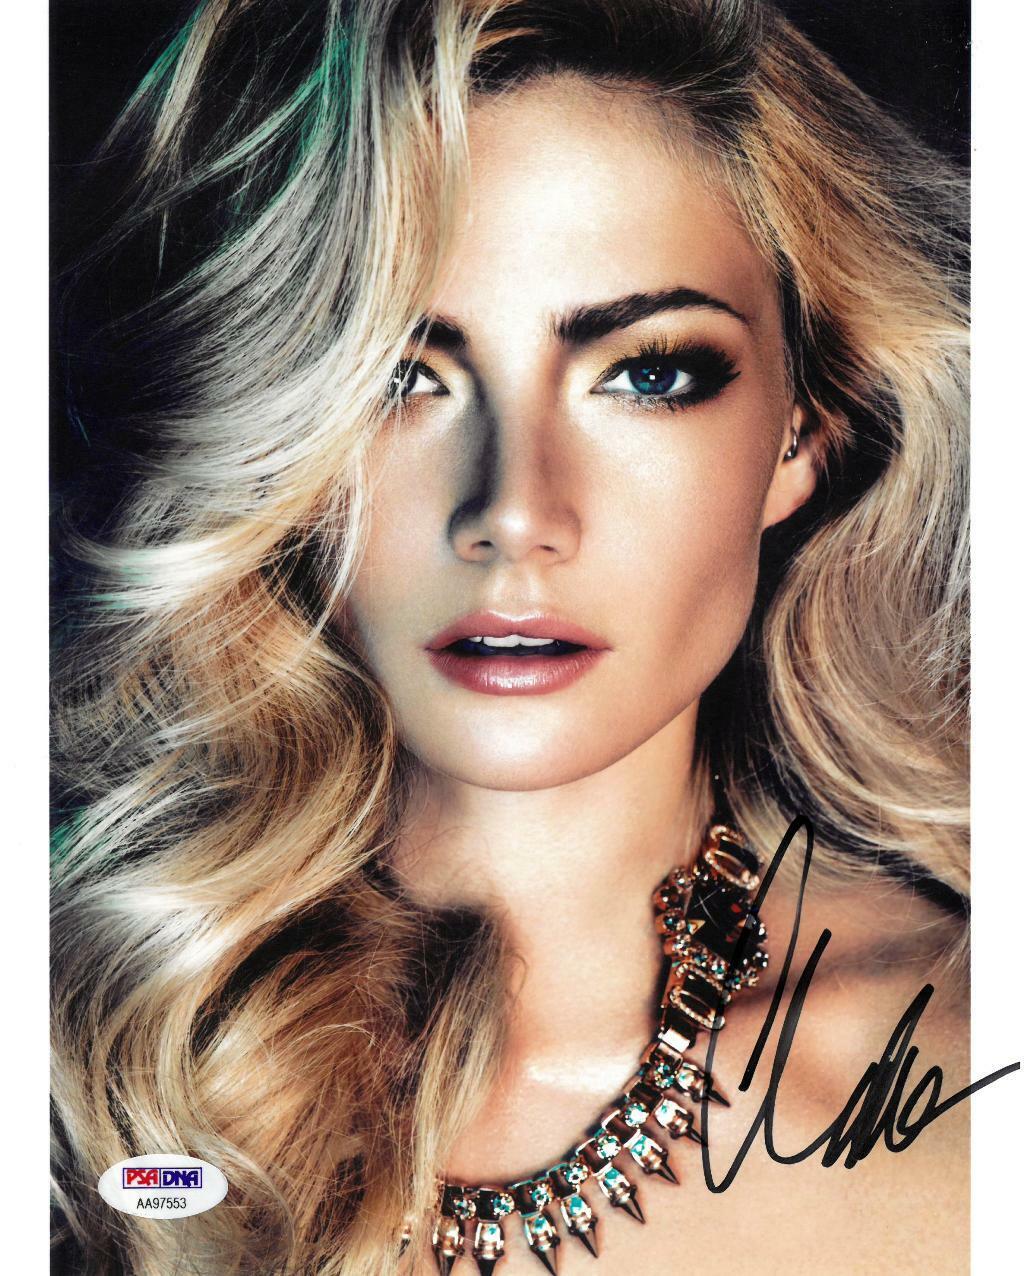 Clara Paget Signed Authentic Autographed 8x10 Photo Poster painting PSA/DNA #AA97553